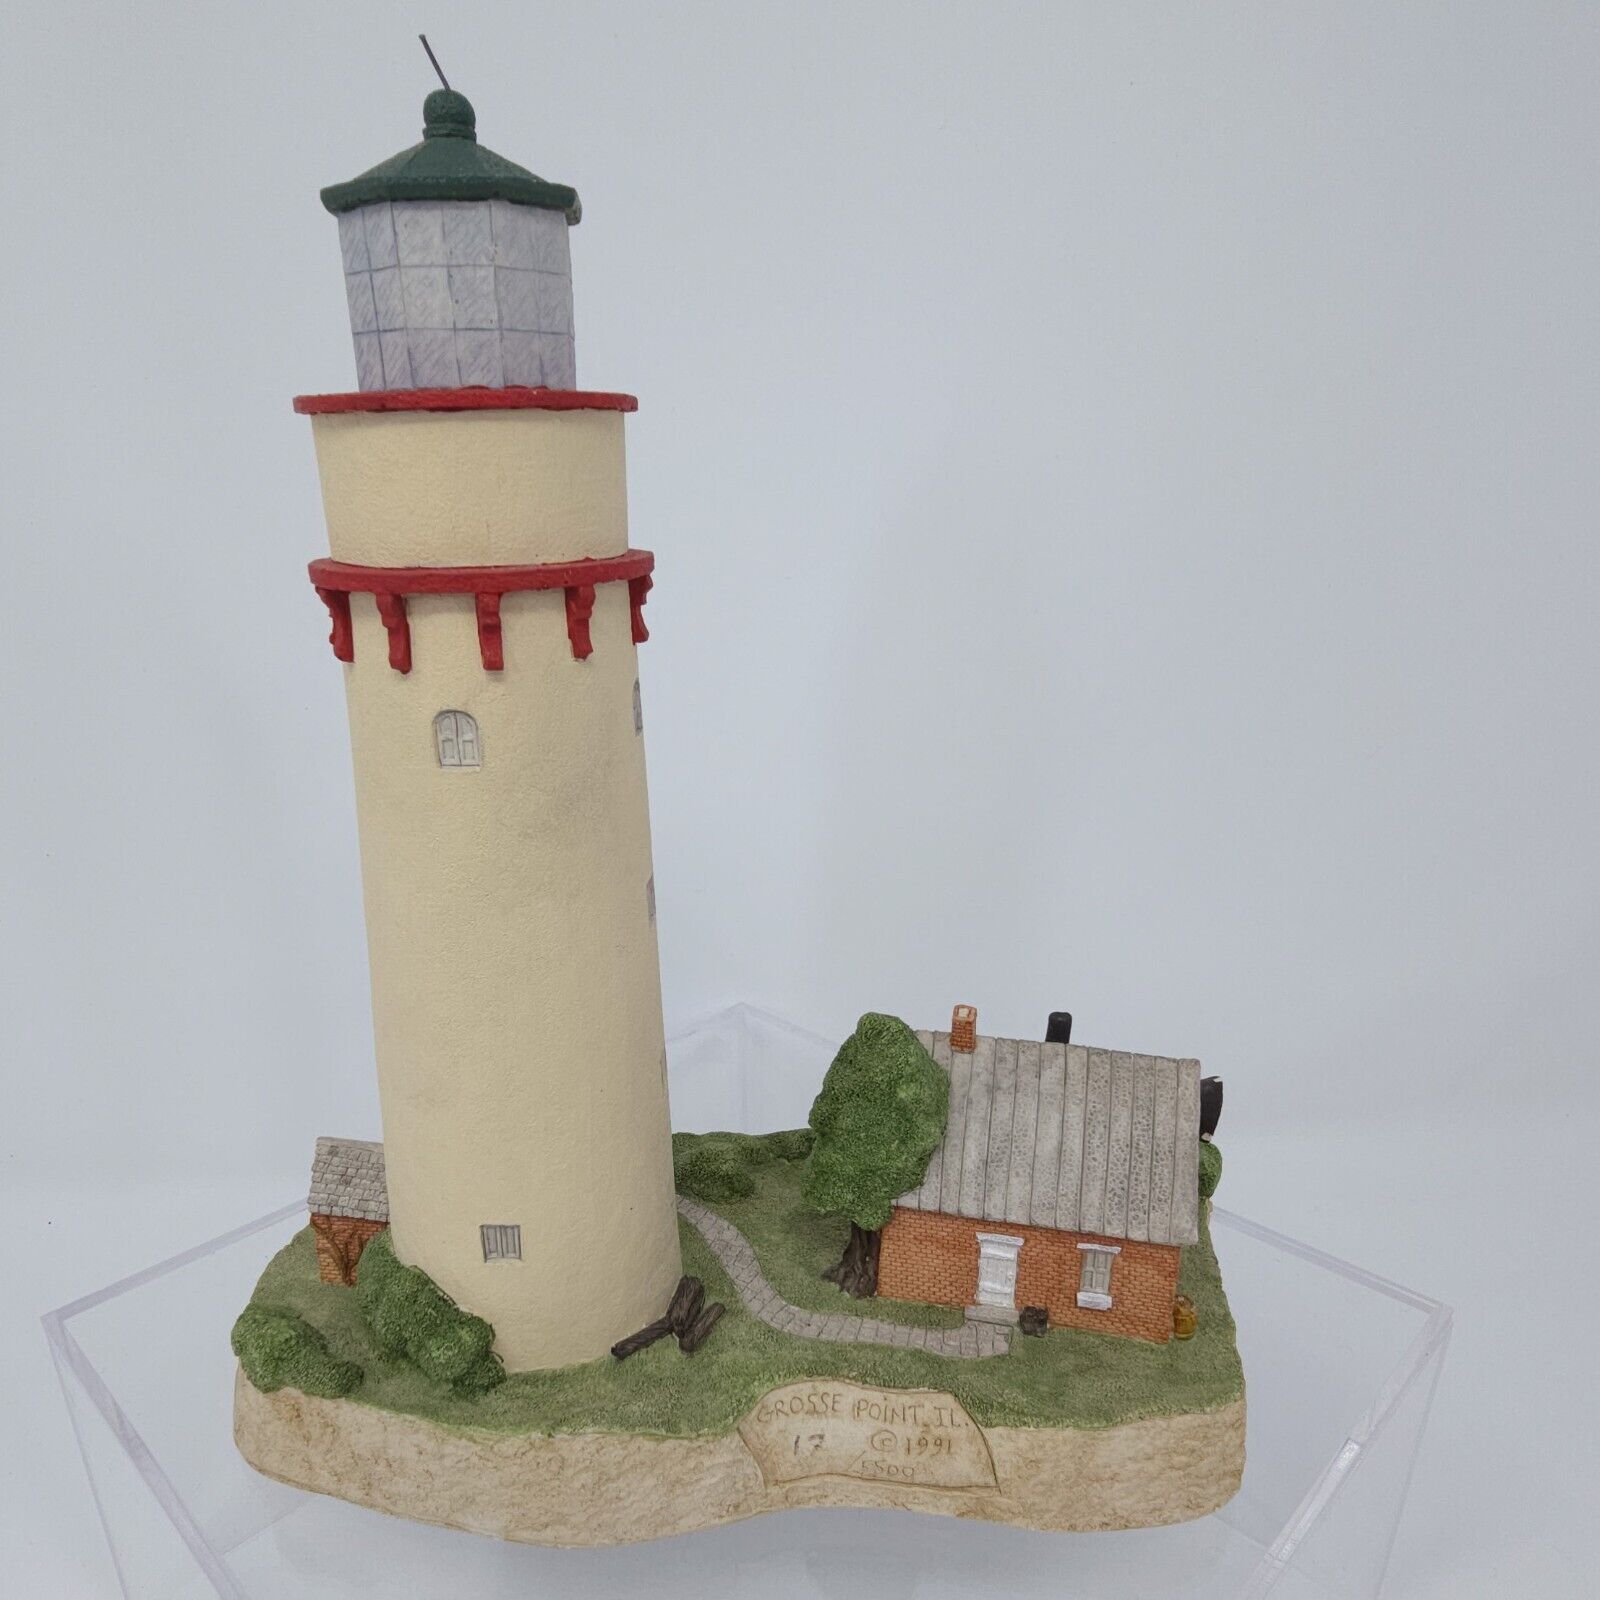 Harbour Lights Grosse Point Lighthouse #120 Illinois 1991 Numbered 17 / 5500